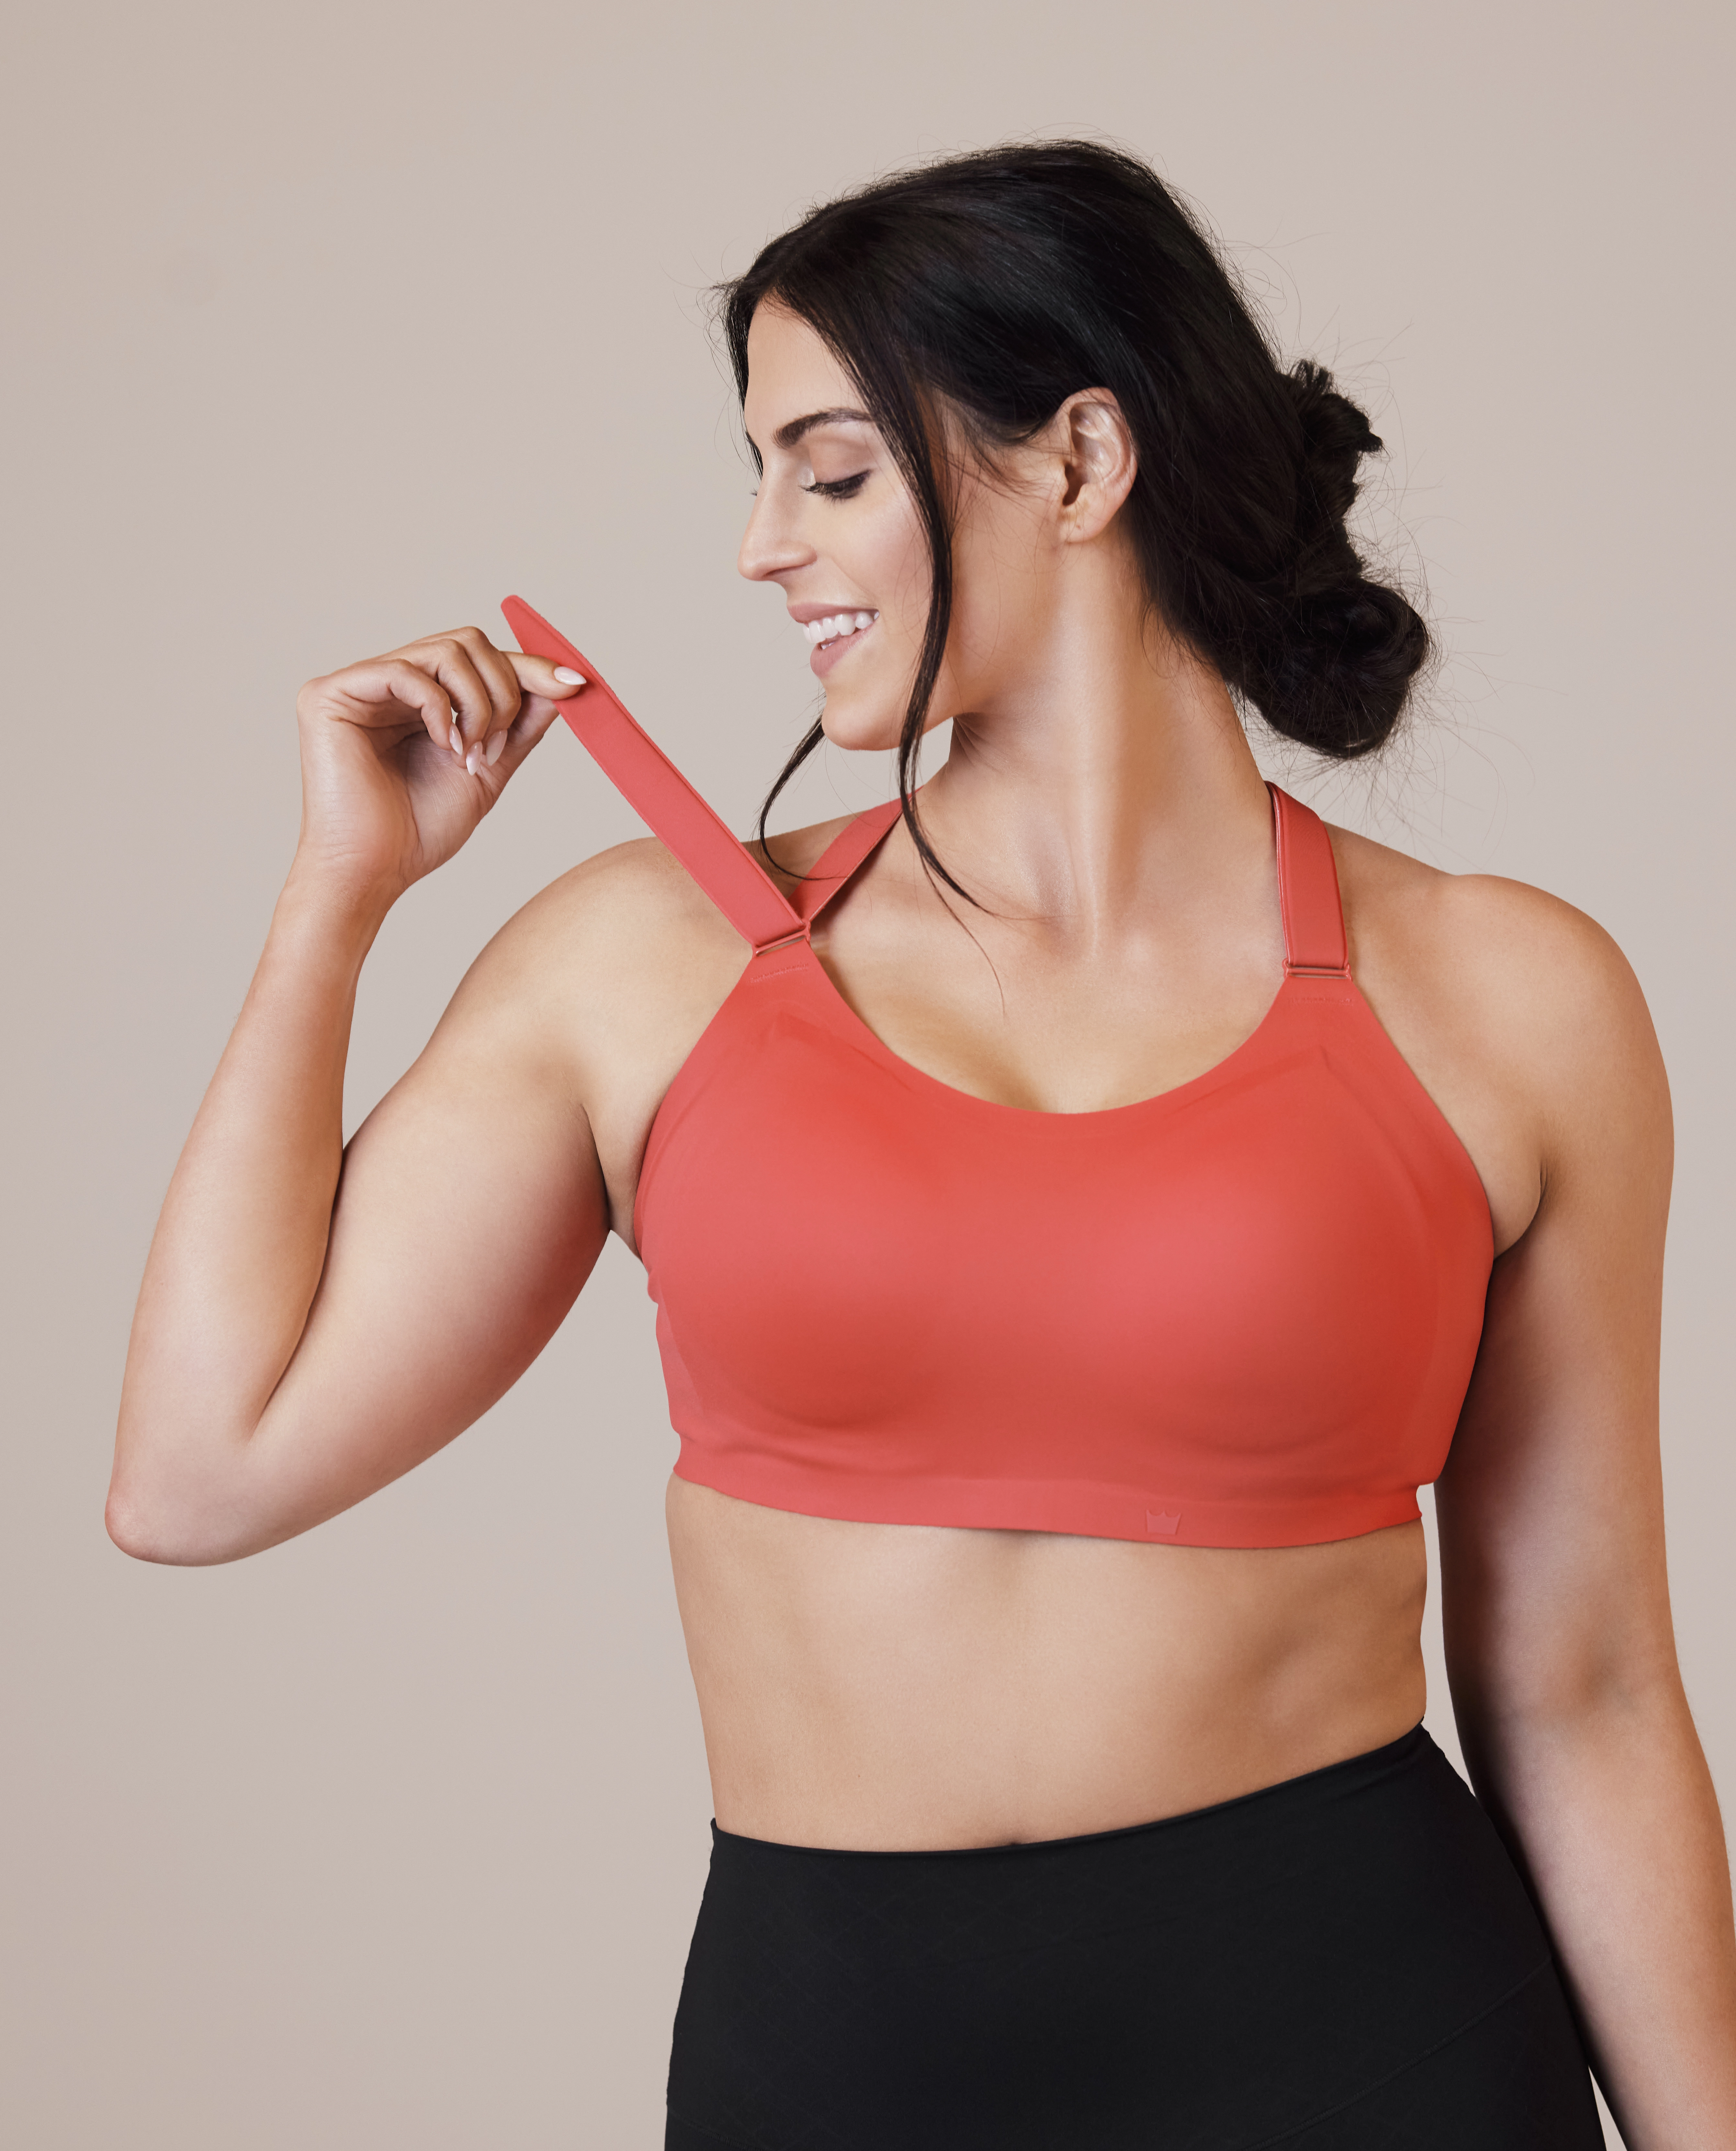 SheFit Enters Next Chapter With Sports Bra Studio, New Products